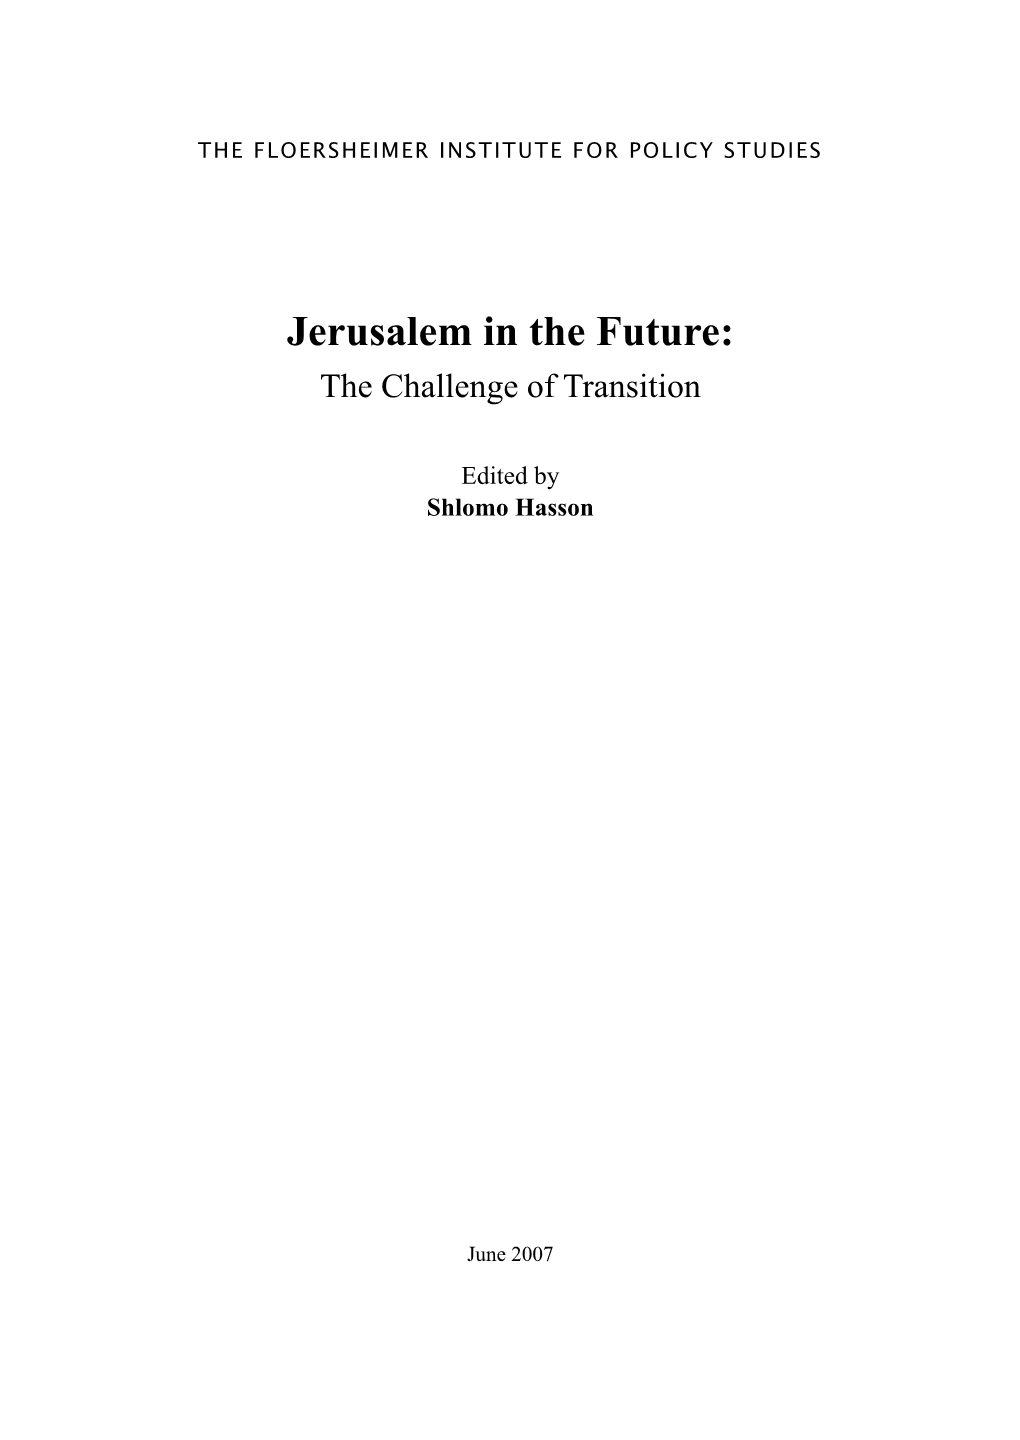 Jerusalem in the Future: the Challenge of Transition